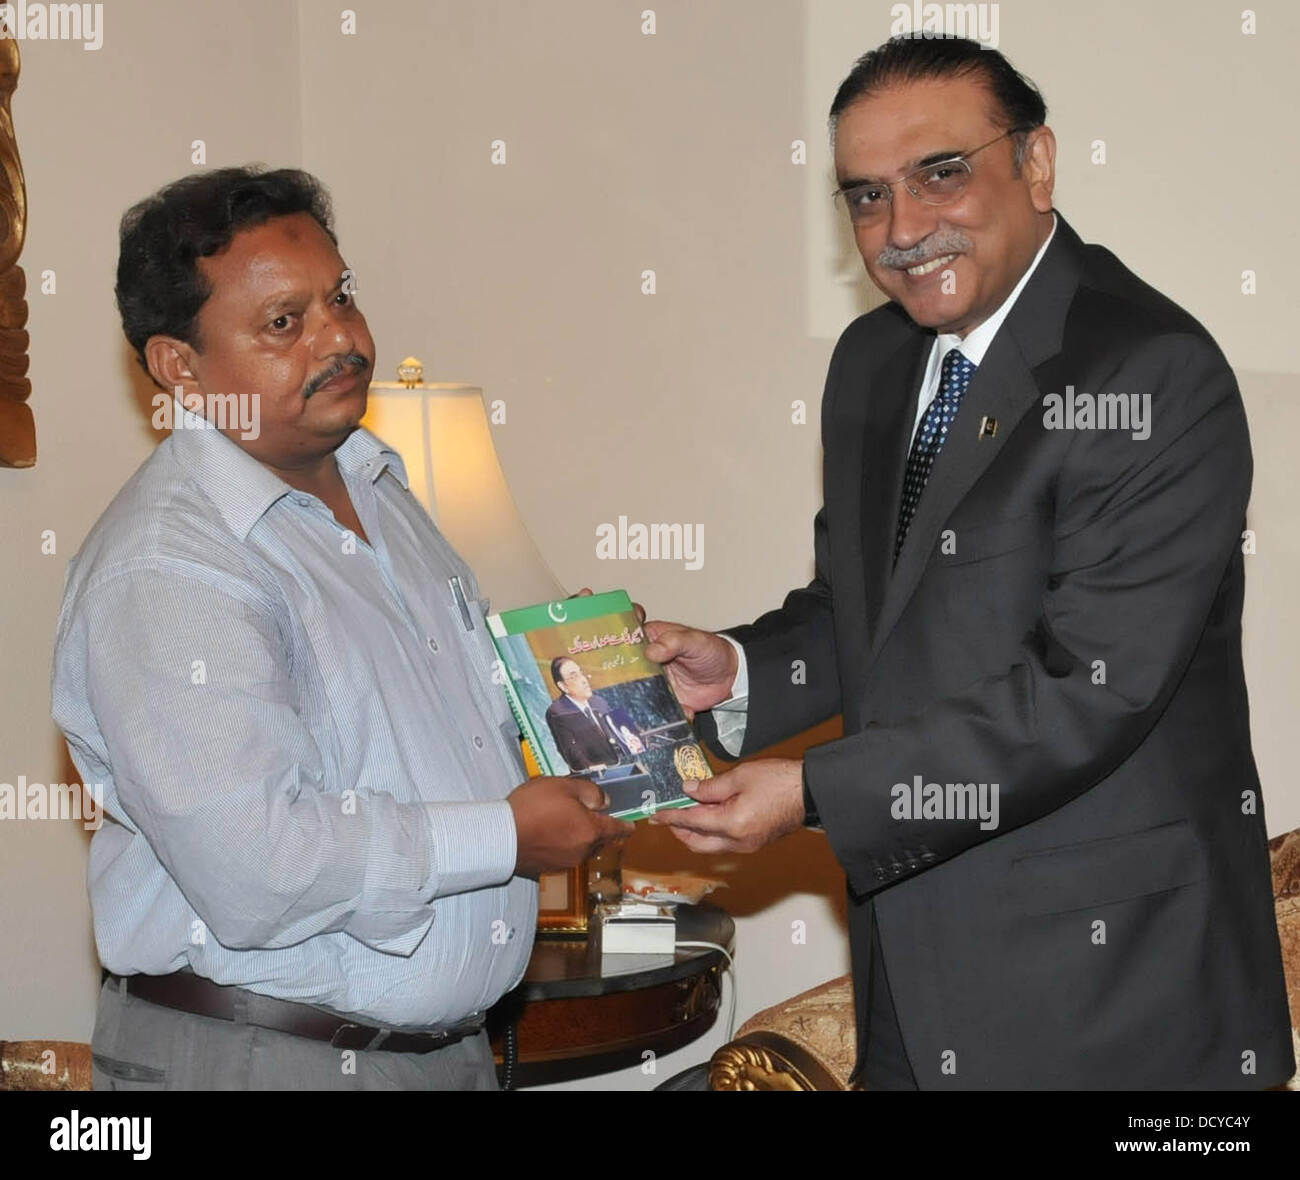 Islamabad, Pakistan. 22nd August 2013.    Mr. Muhammad Tahseen Abbasi presenting his book to President Asif Ali Zardari at the Aiwan-e-Sadr, Islamabad on August 22, 2013.    Handout by Pakistan informtion department      (Photo by PID/Deanpictures/Alamy Live News) Stock Photo